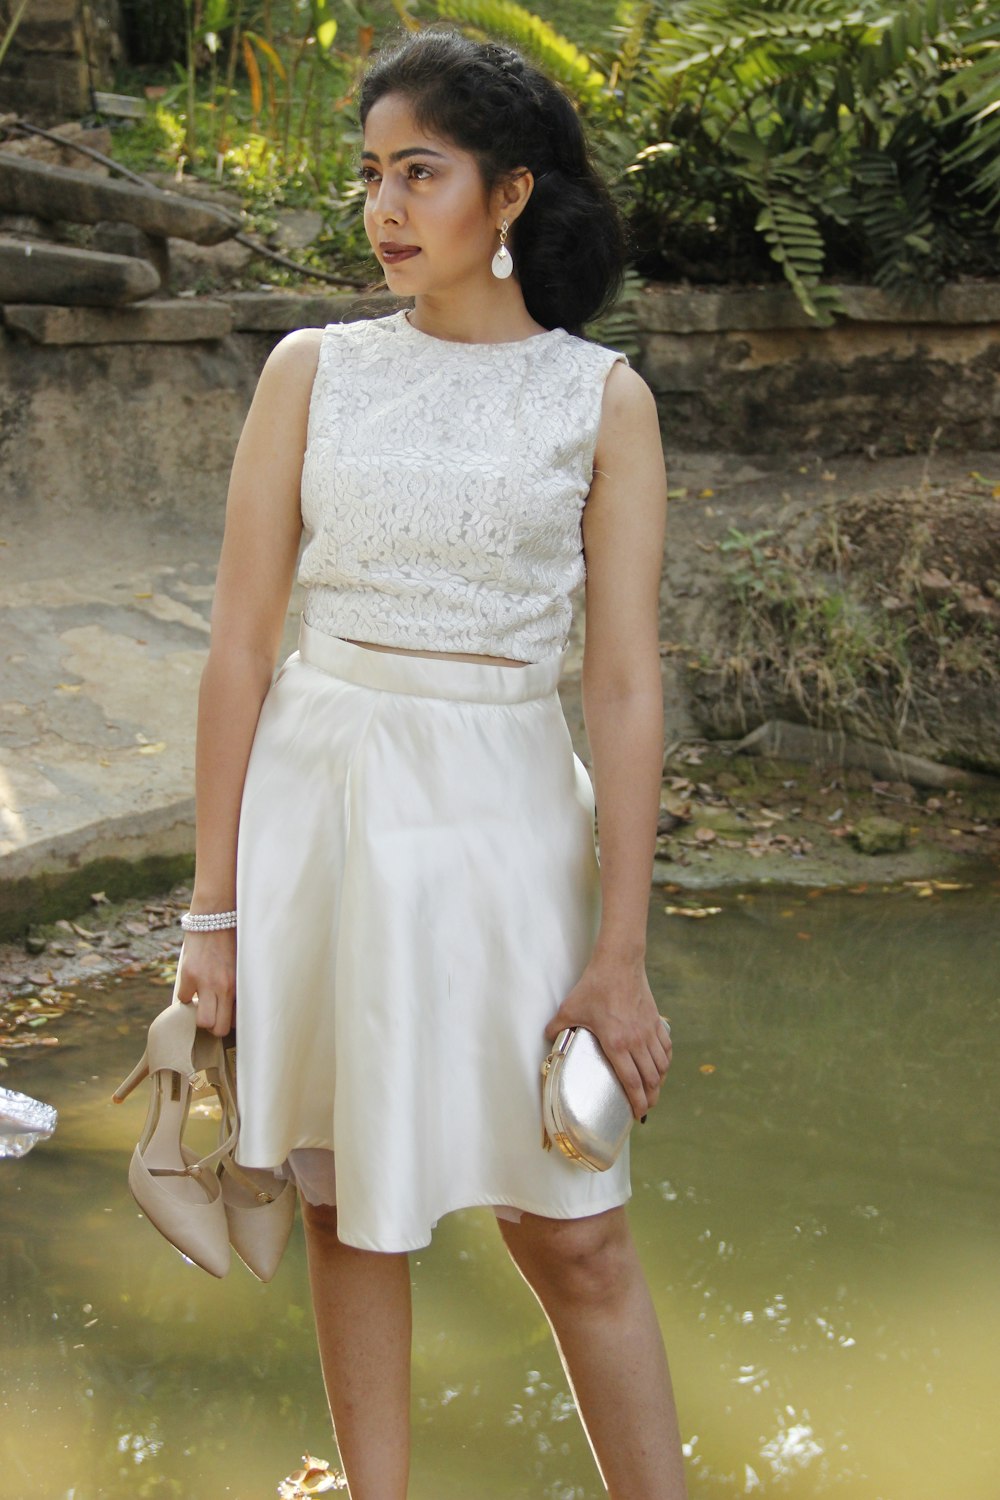 a woman in a white dress standing in front of a pond